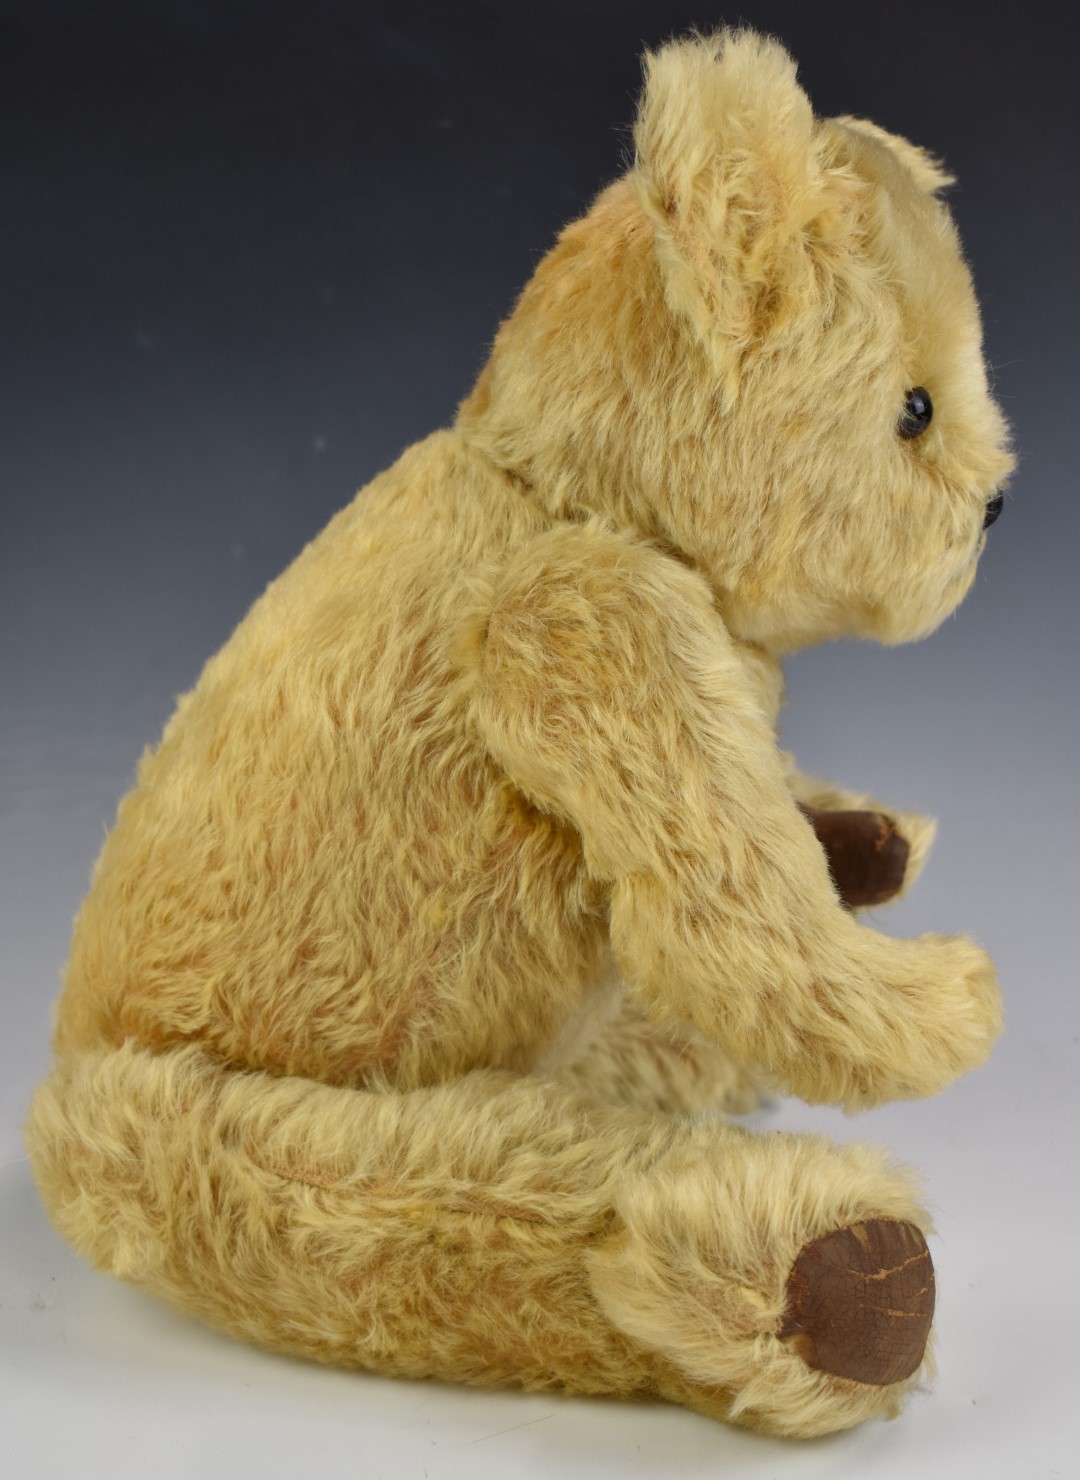 Fadap French Teddy bear with golden mohair, straw filling, disc joints, leather pads and stitched - Image 2 of 4